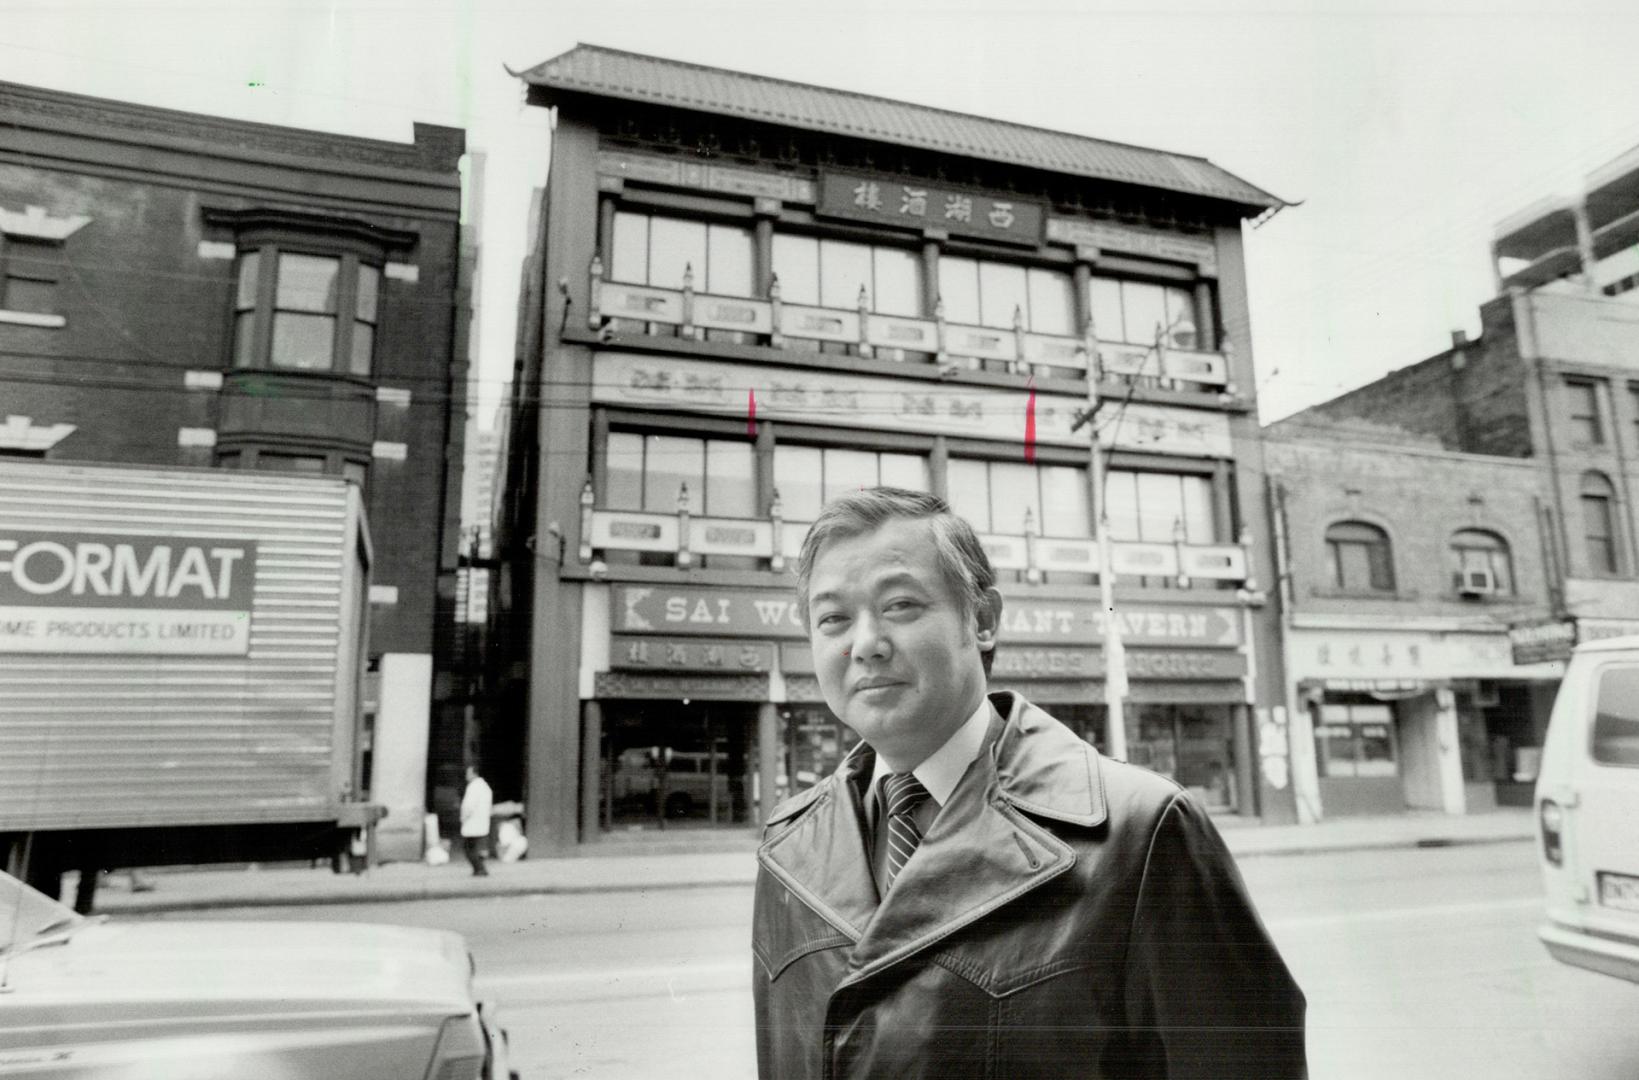 Seen Progress'. Bill Wen restaurateur. Bill Wen arrived in Toronto in 1954, and has had a few million people for dinner at his Sai Woo Restaurant since then